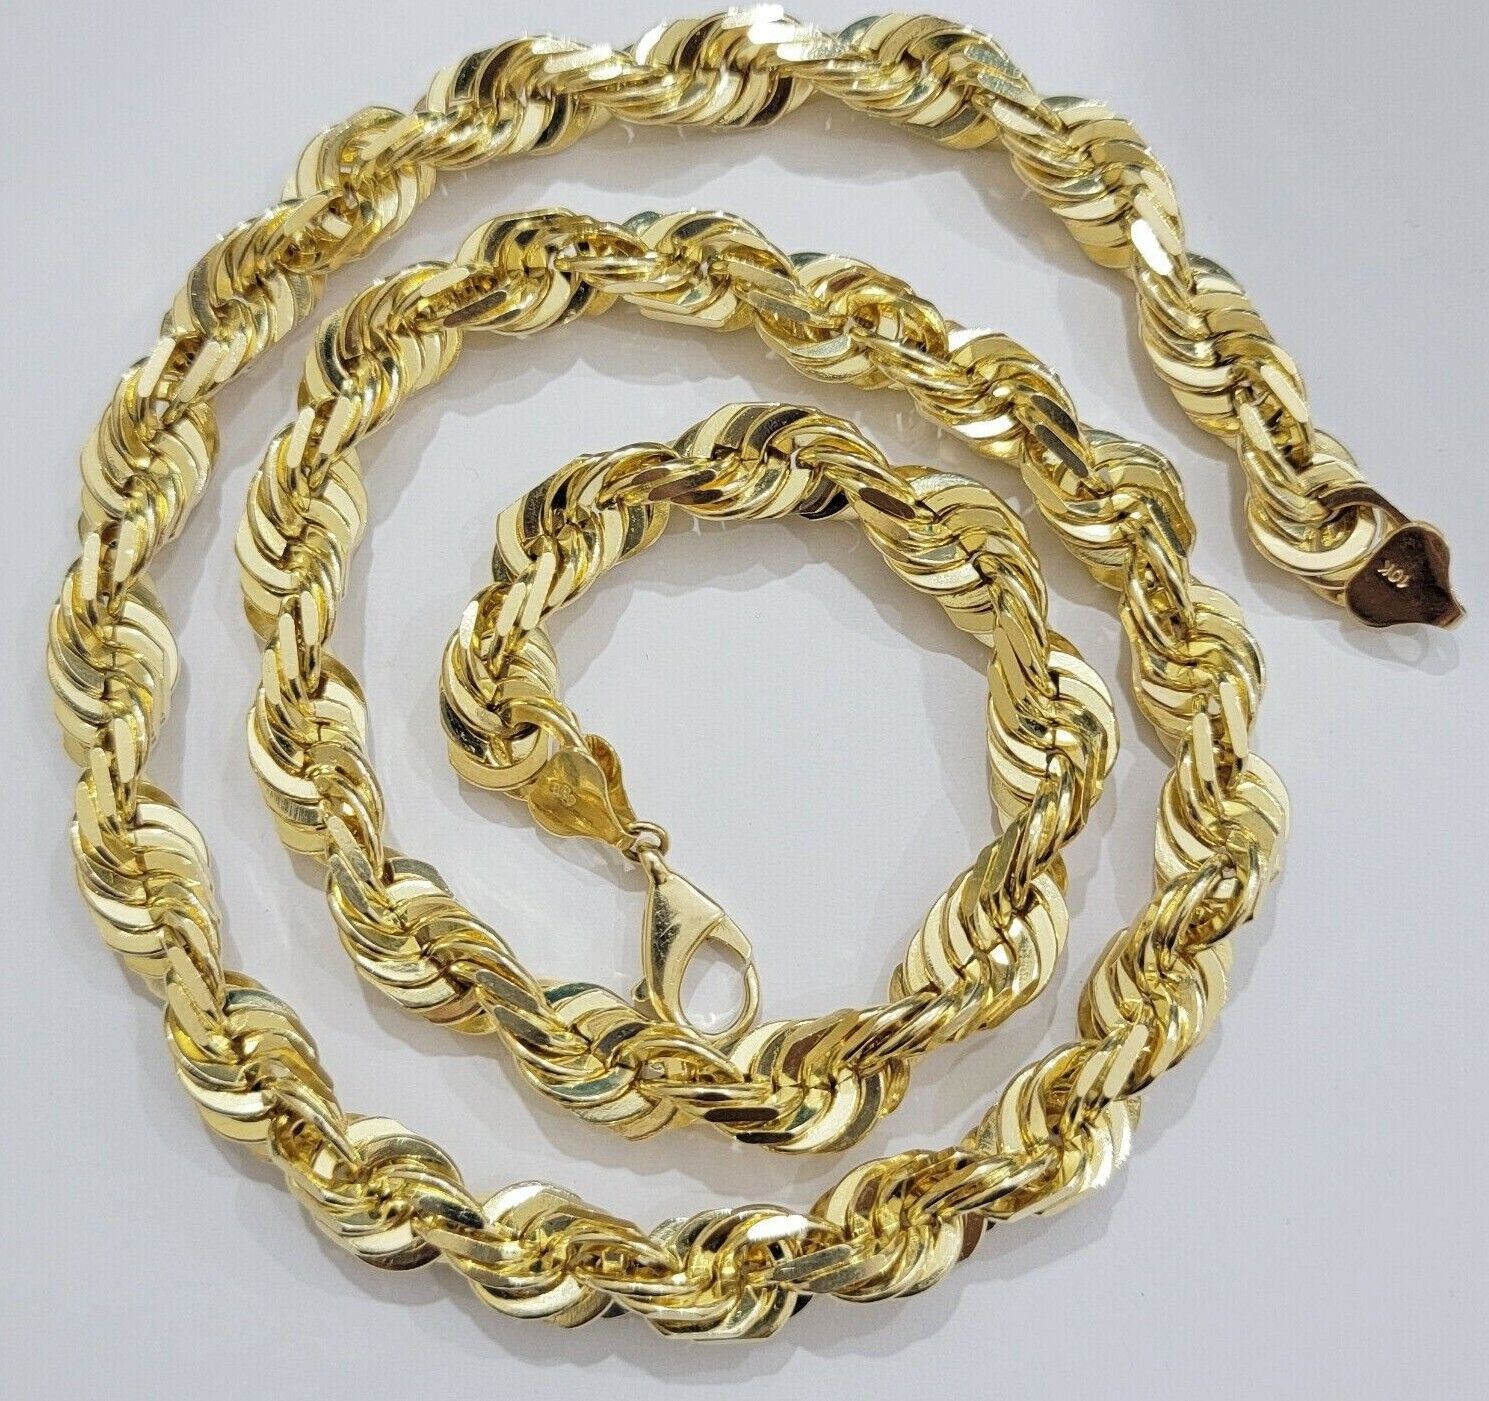 14mm Solid 10k Yellow Gold Rope Chain Necklace 28" Inch Mens Thick & Heavy Shiny